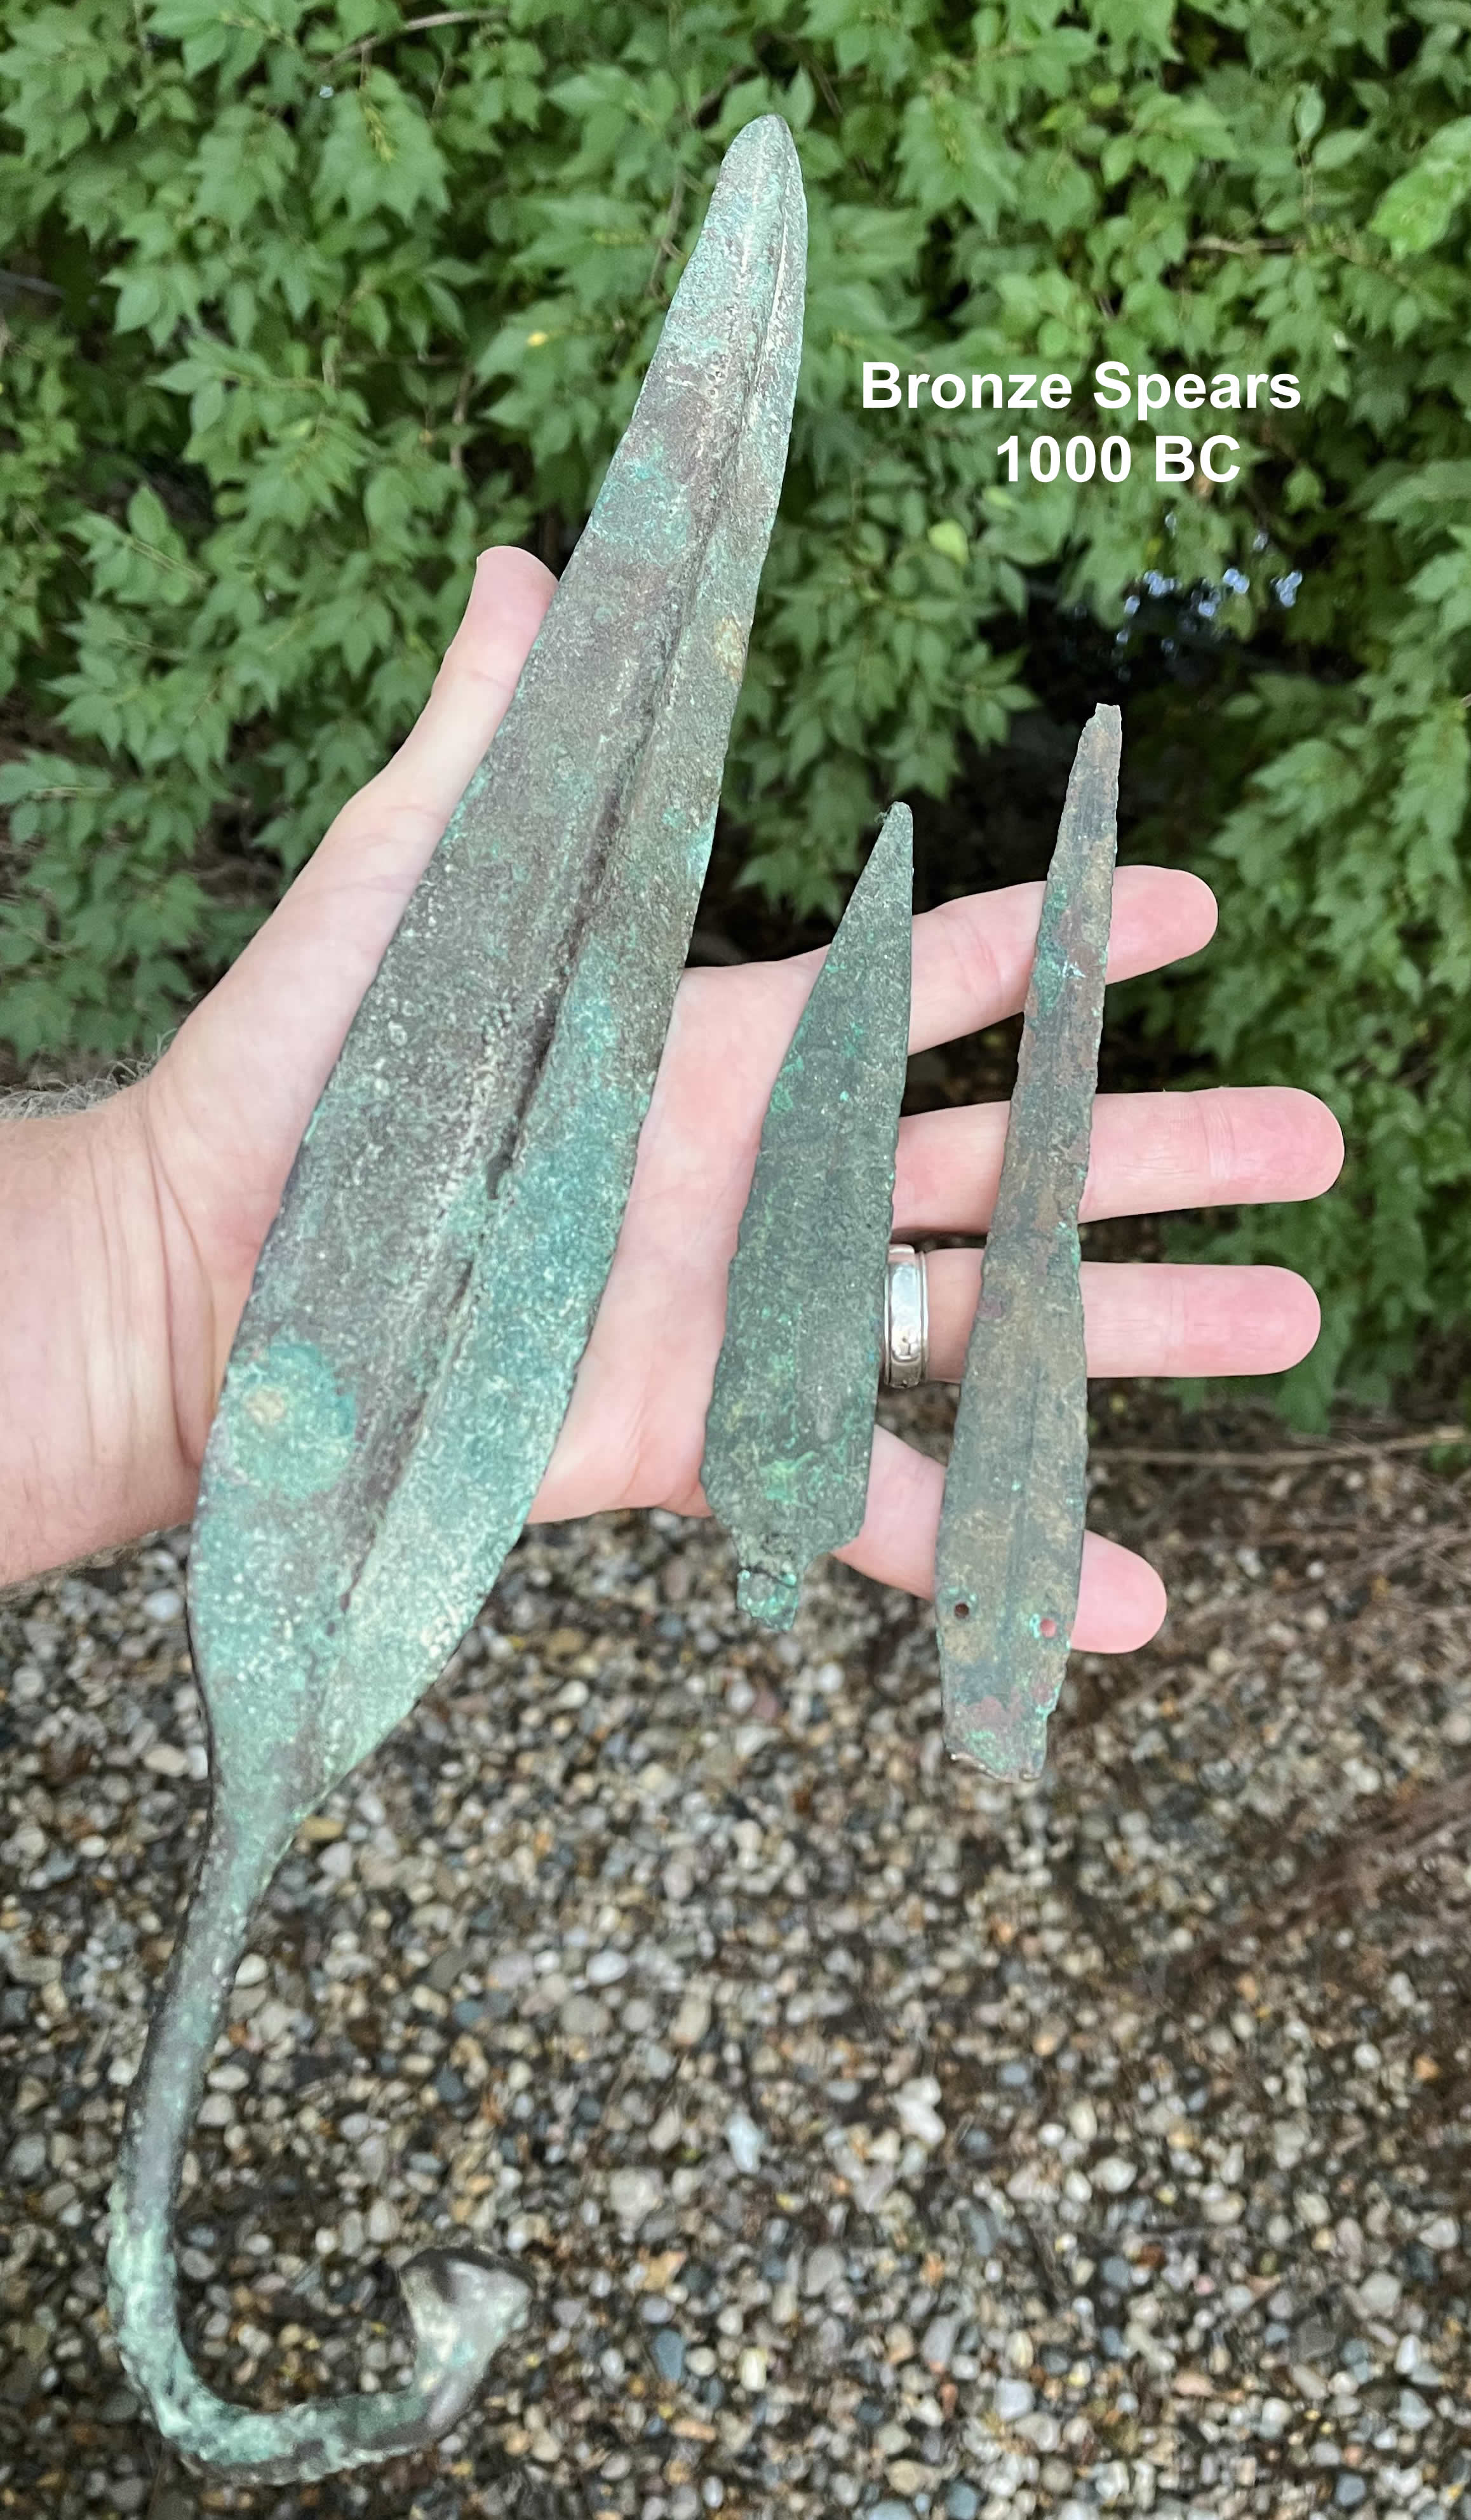 Group 1000 BC Three Bronze Spears in hand